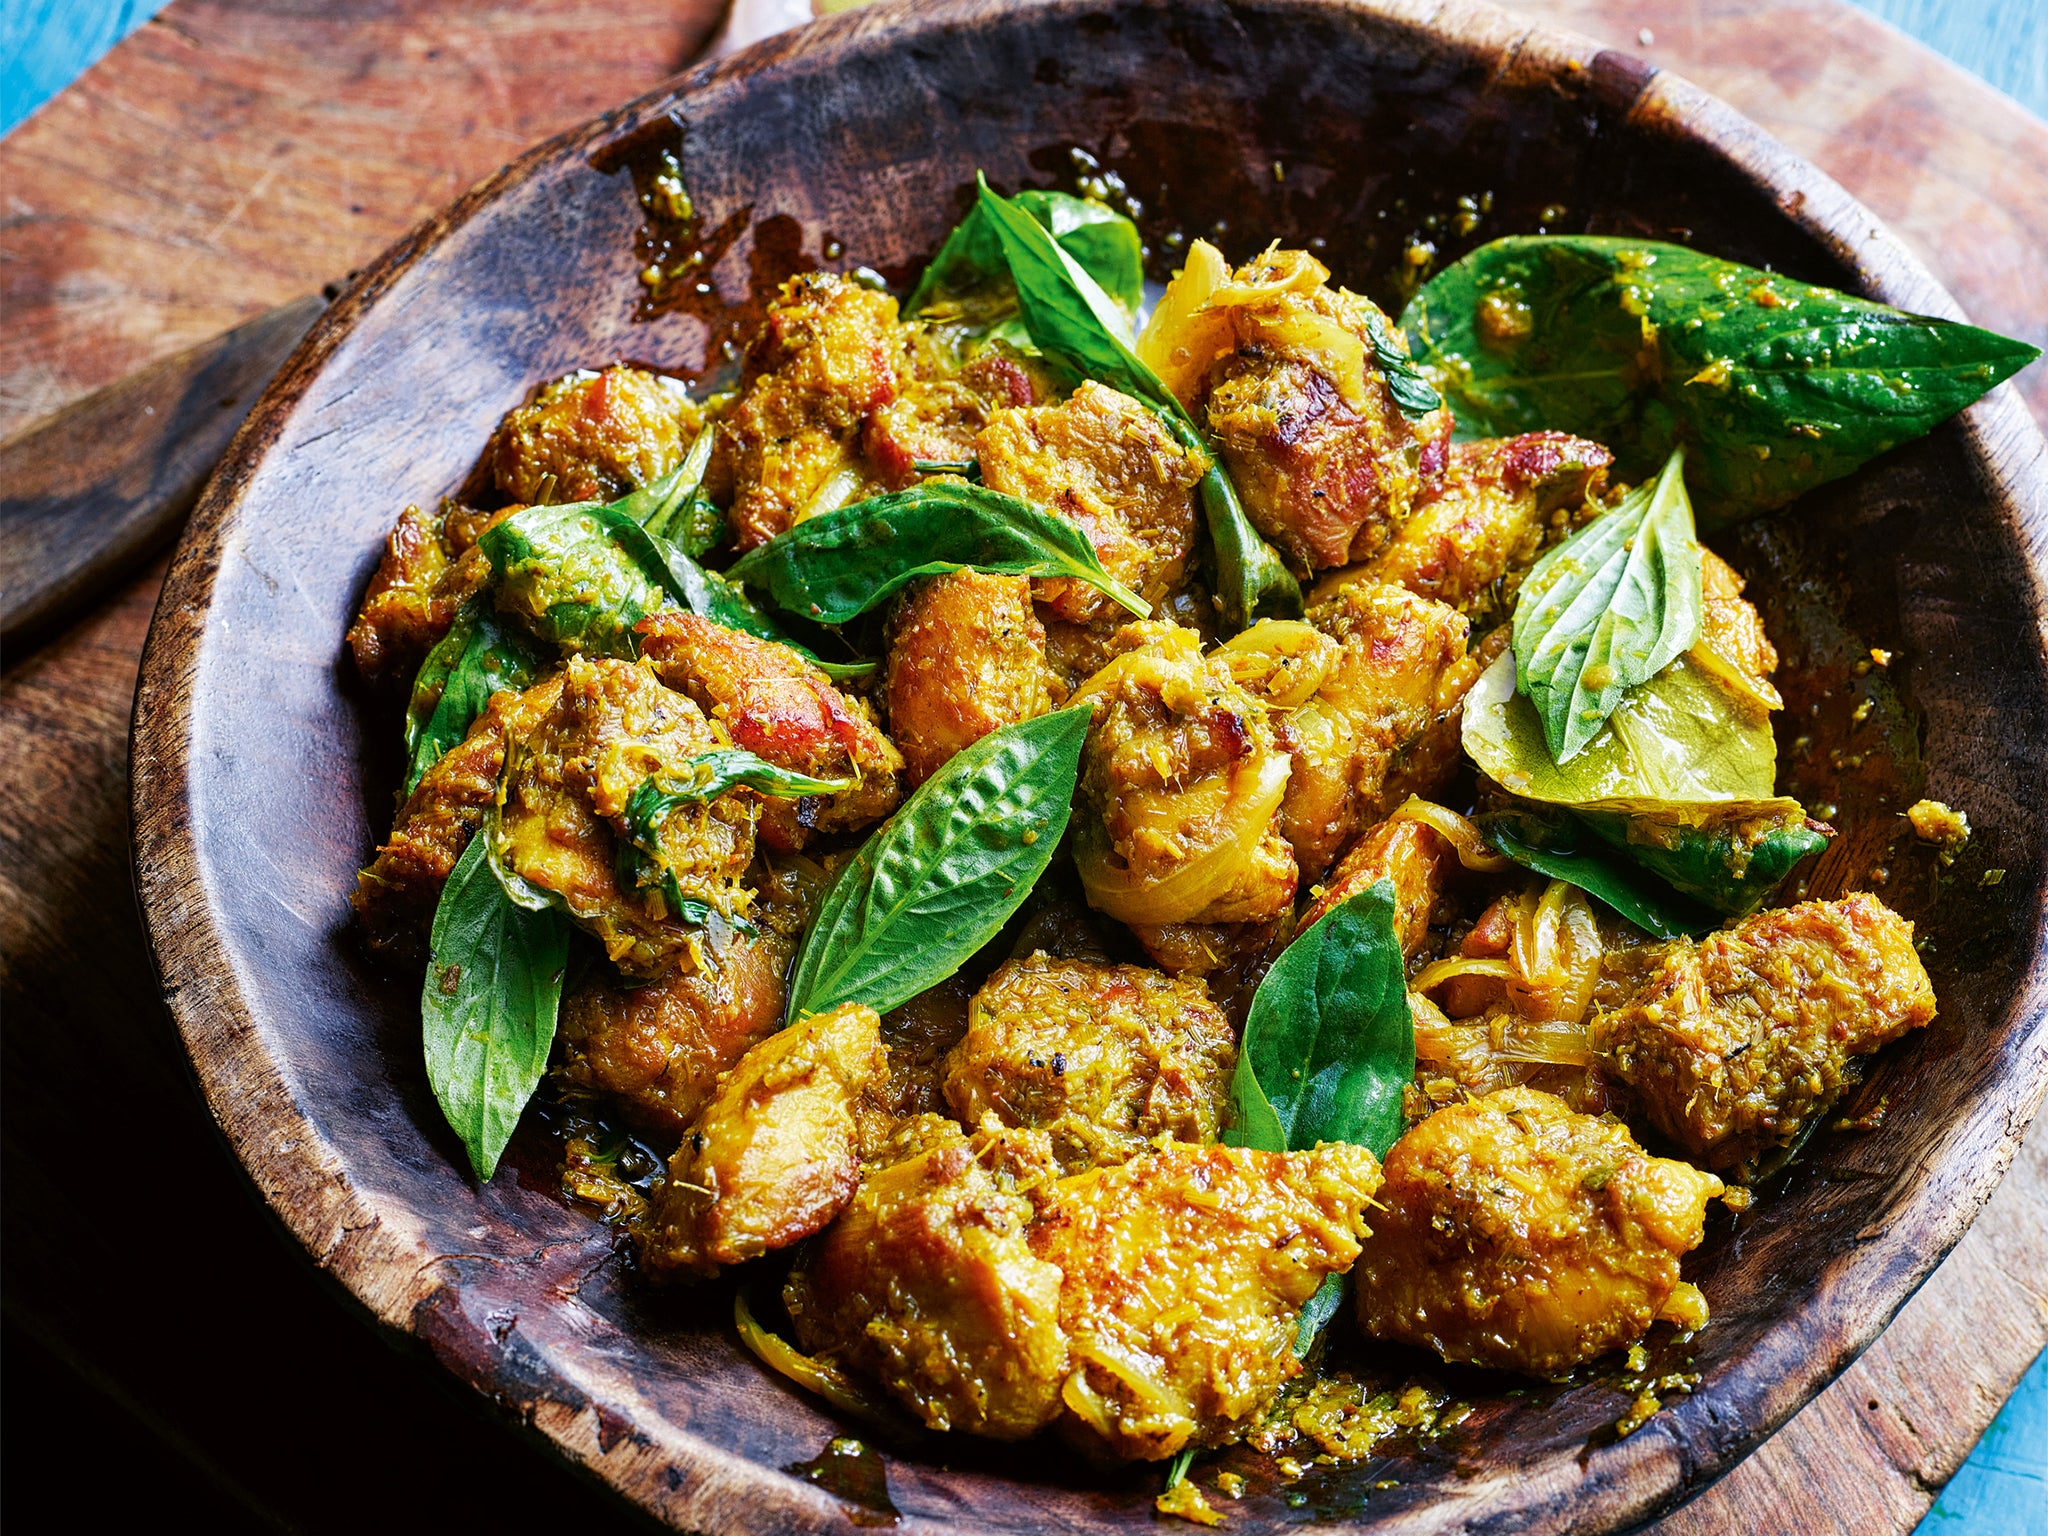 This Thai-inspired dish can be on the table in 30 minutes